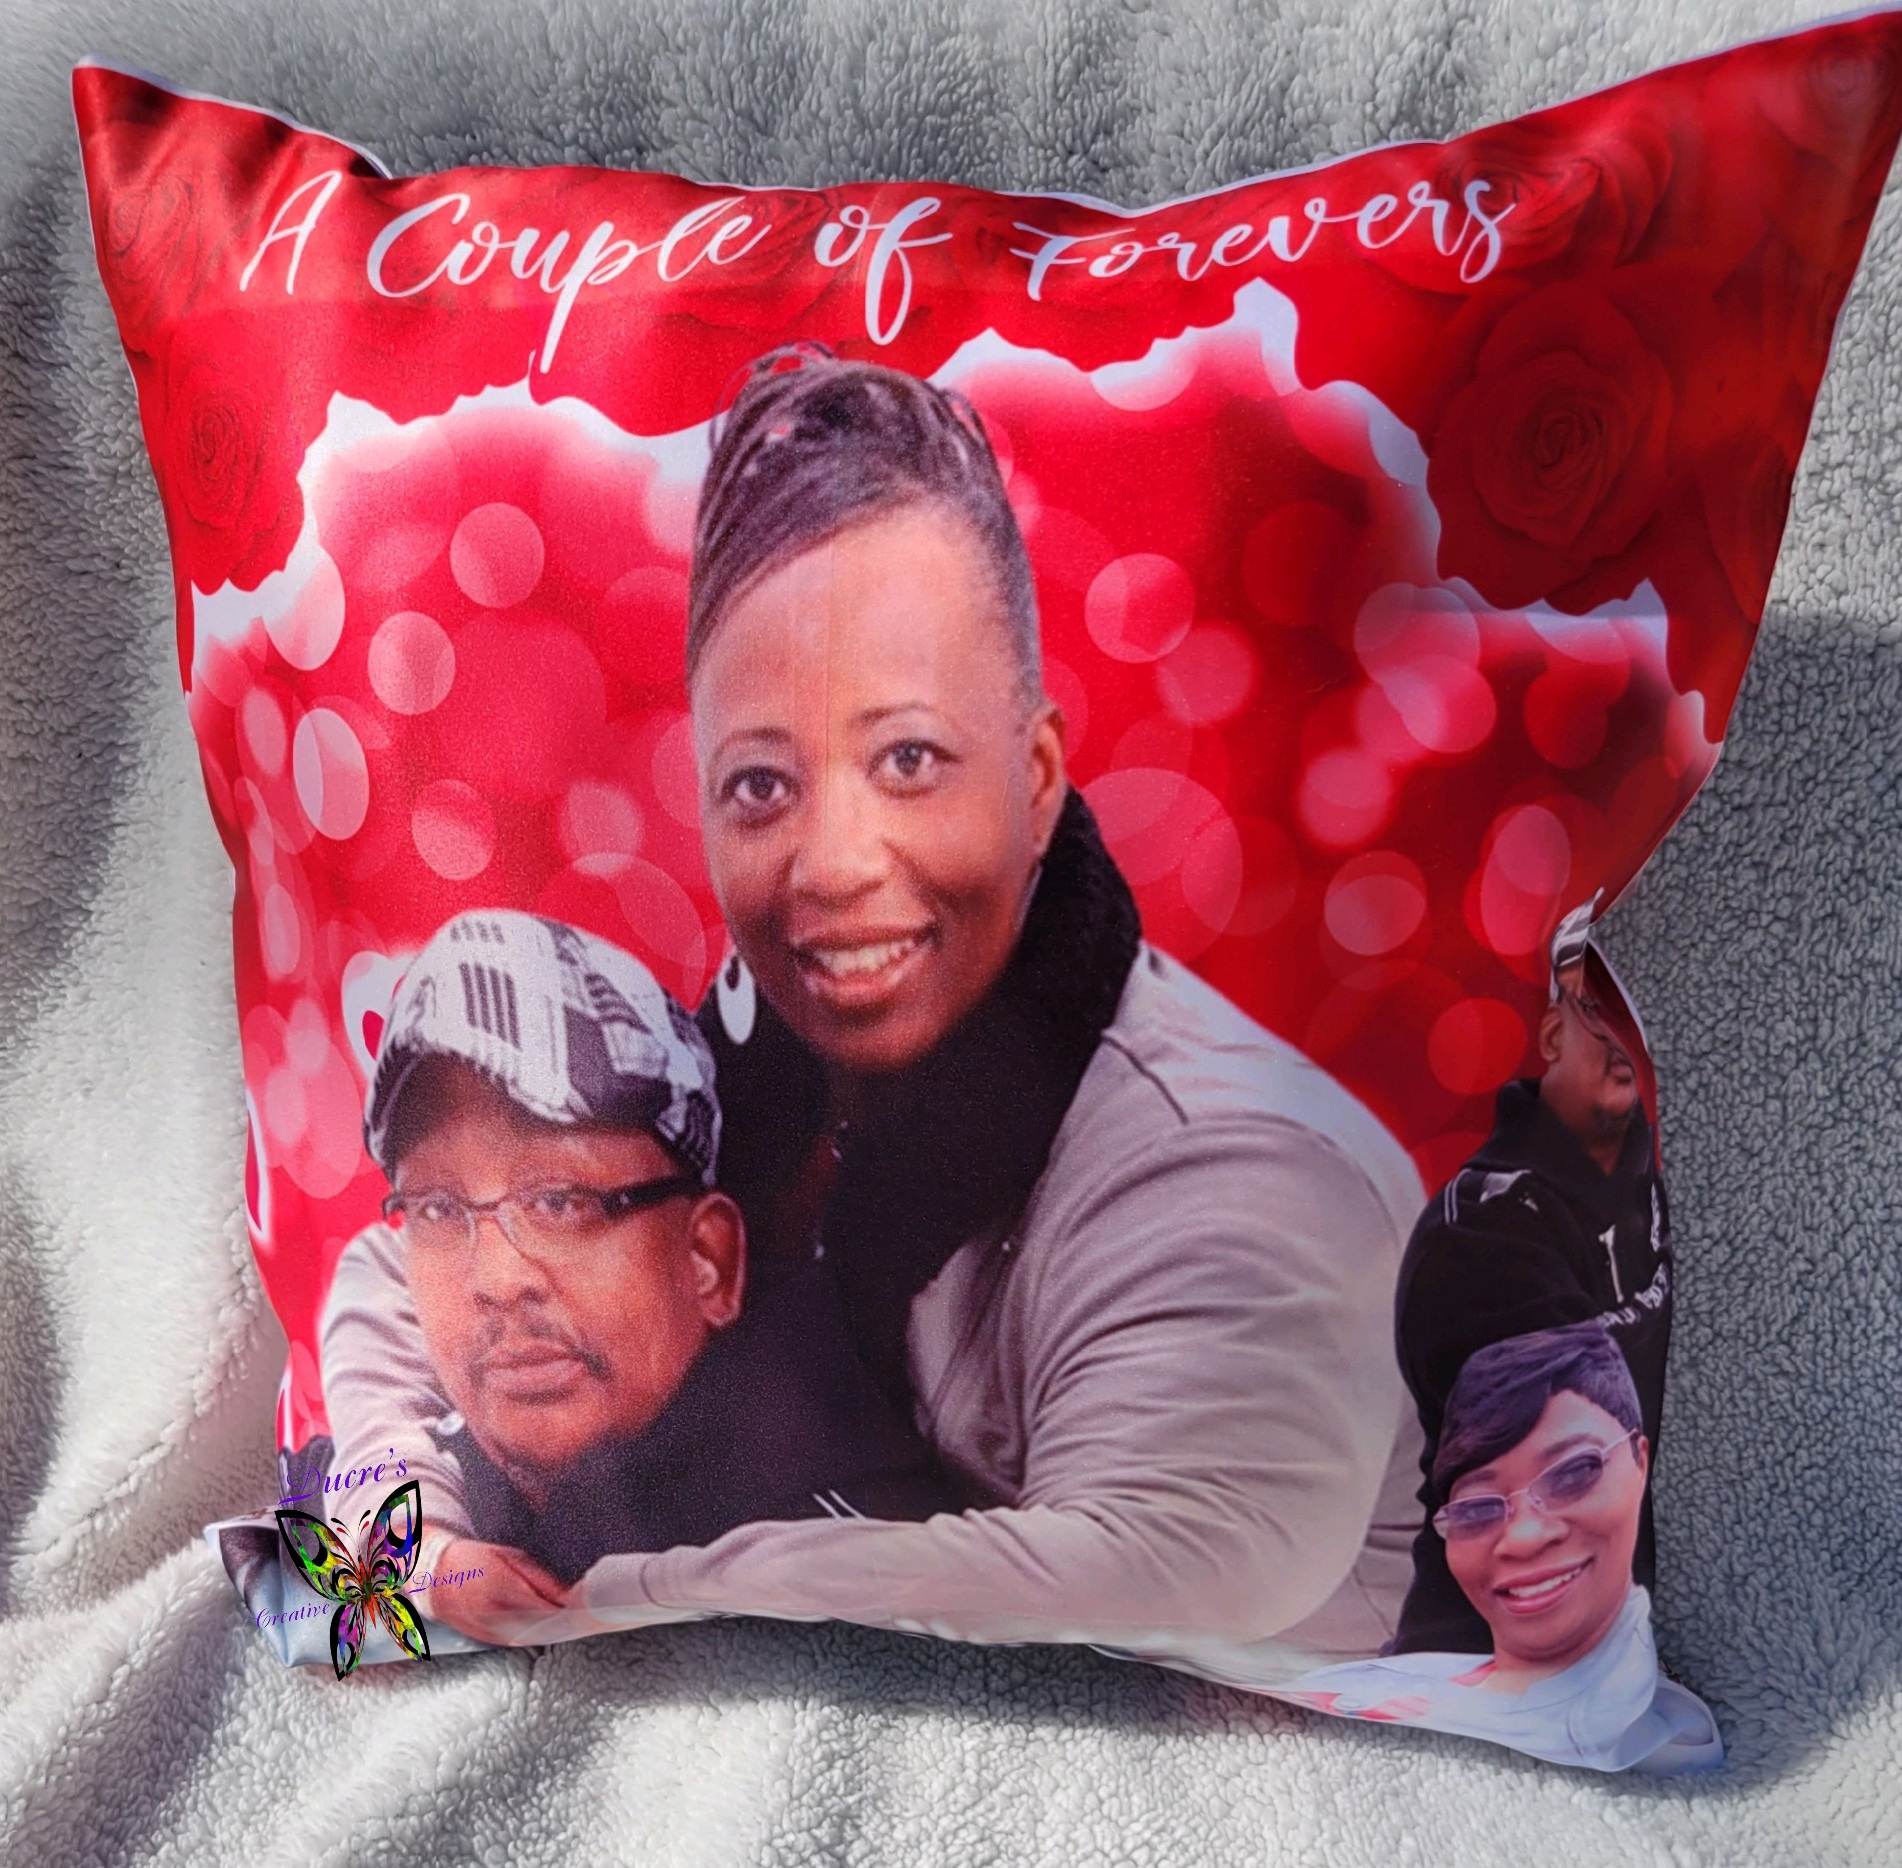 Gallery Personalized Photo Pillow